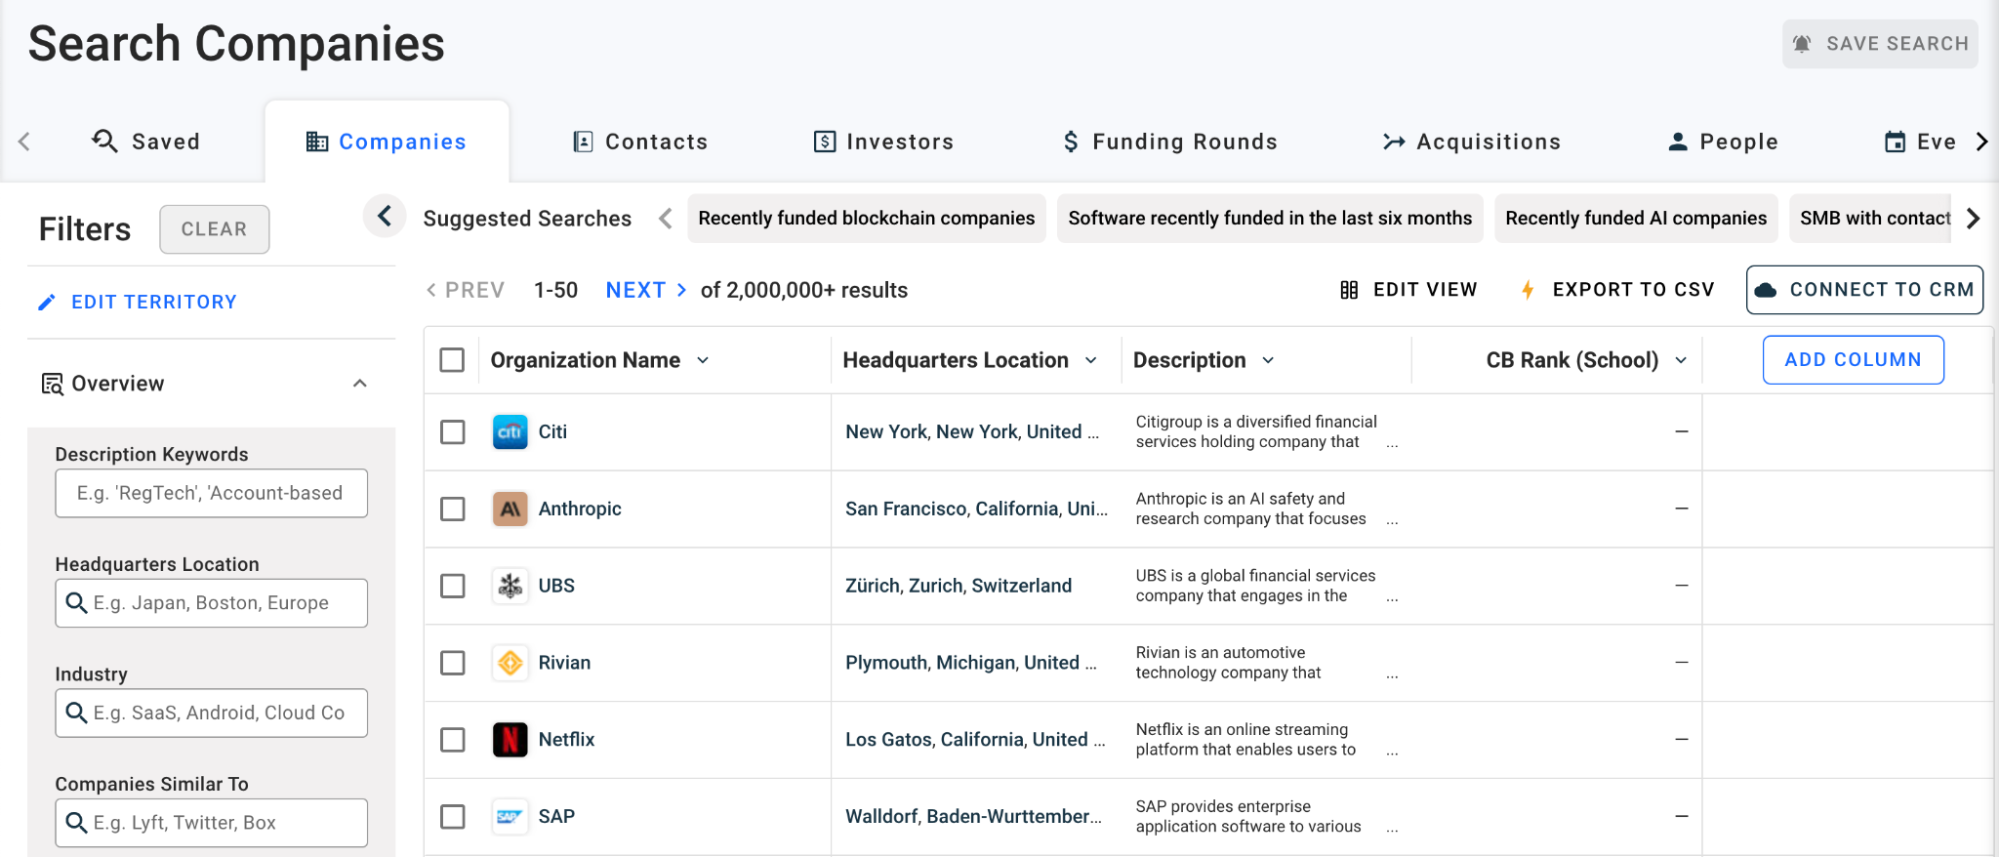 Crunchbase user interface showing various methods of finding companies based on firmographic segmentation